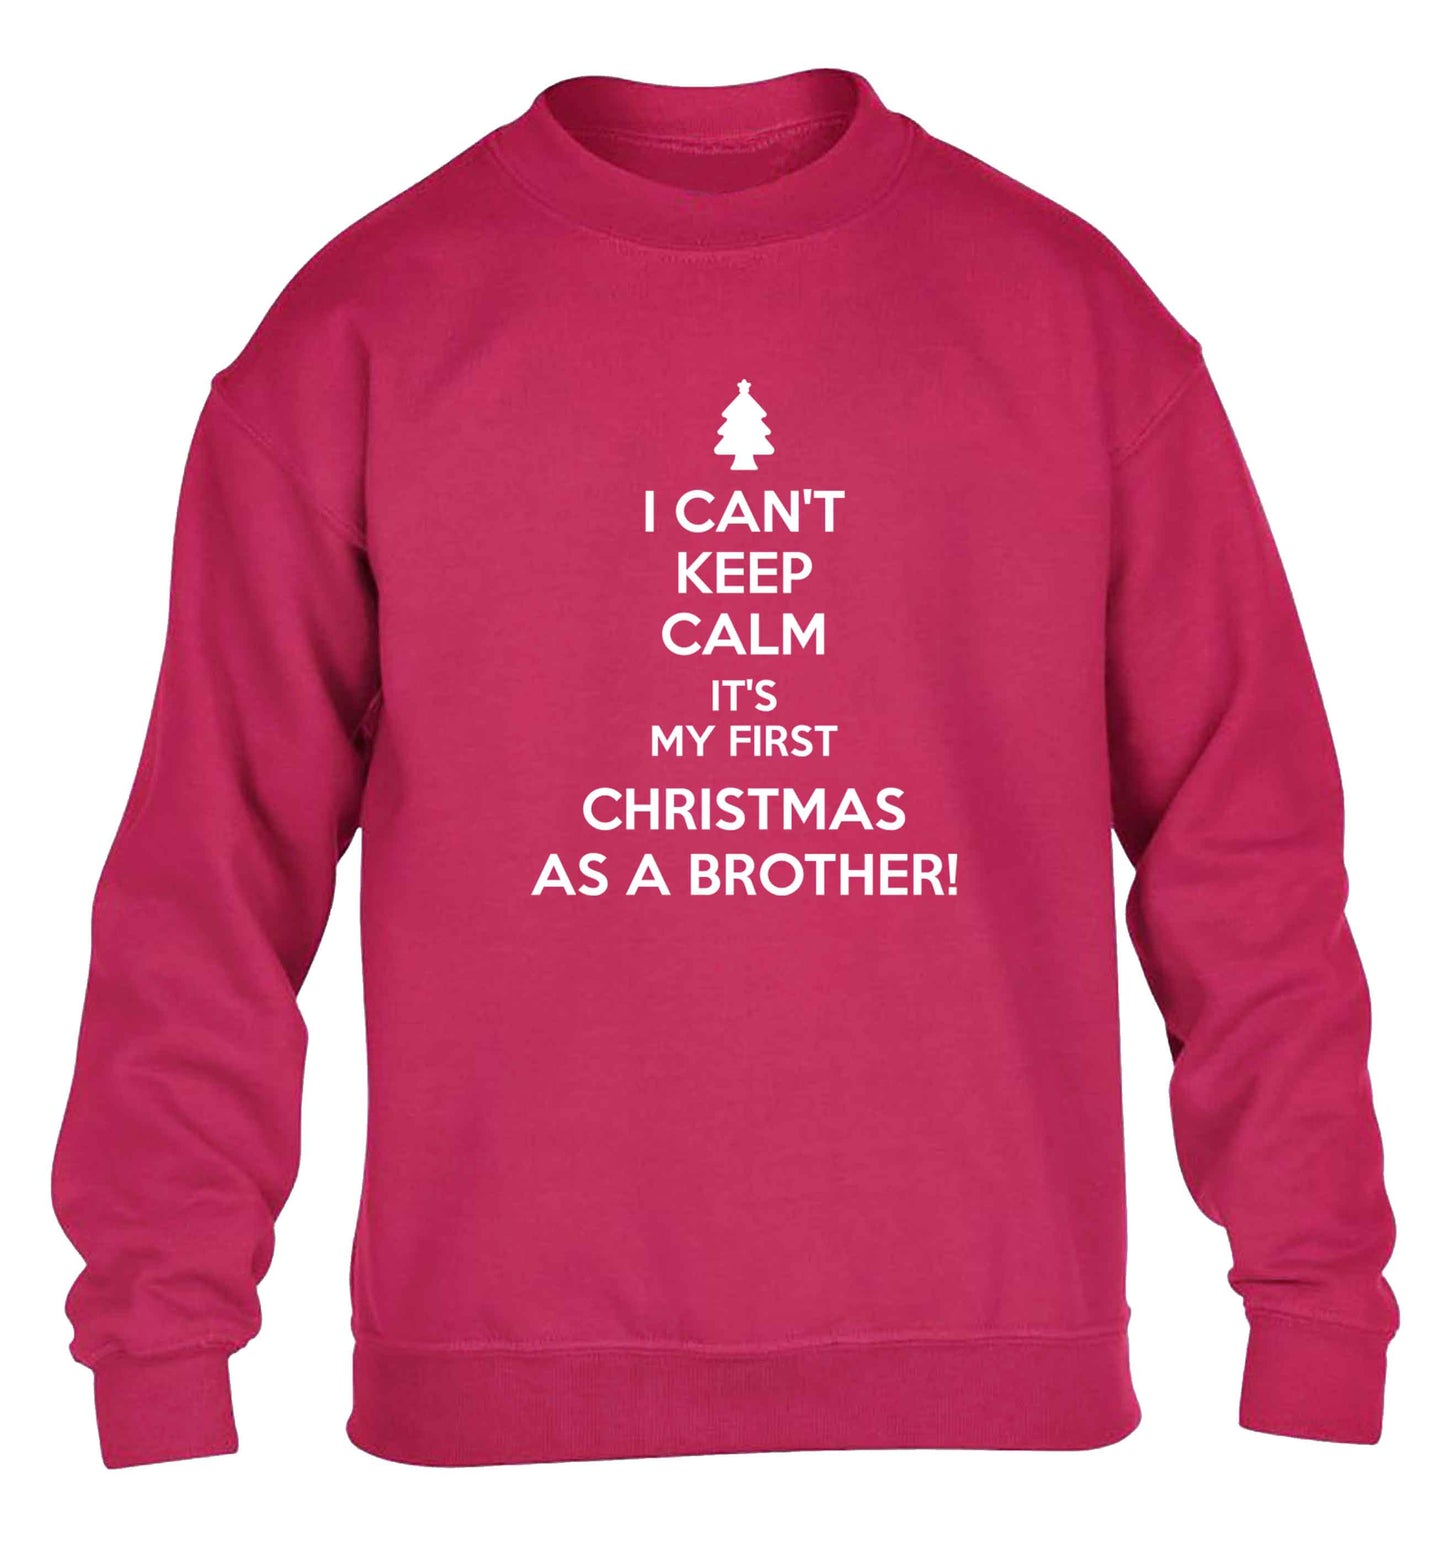 I can't keep calm it's my first Christmas as a brother! children's pink sweater 12-13 Years